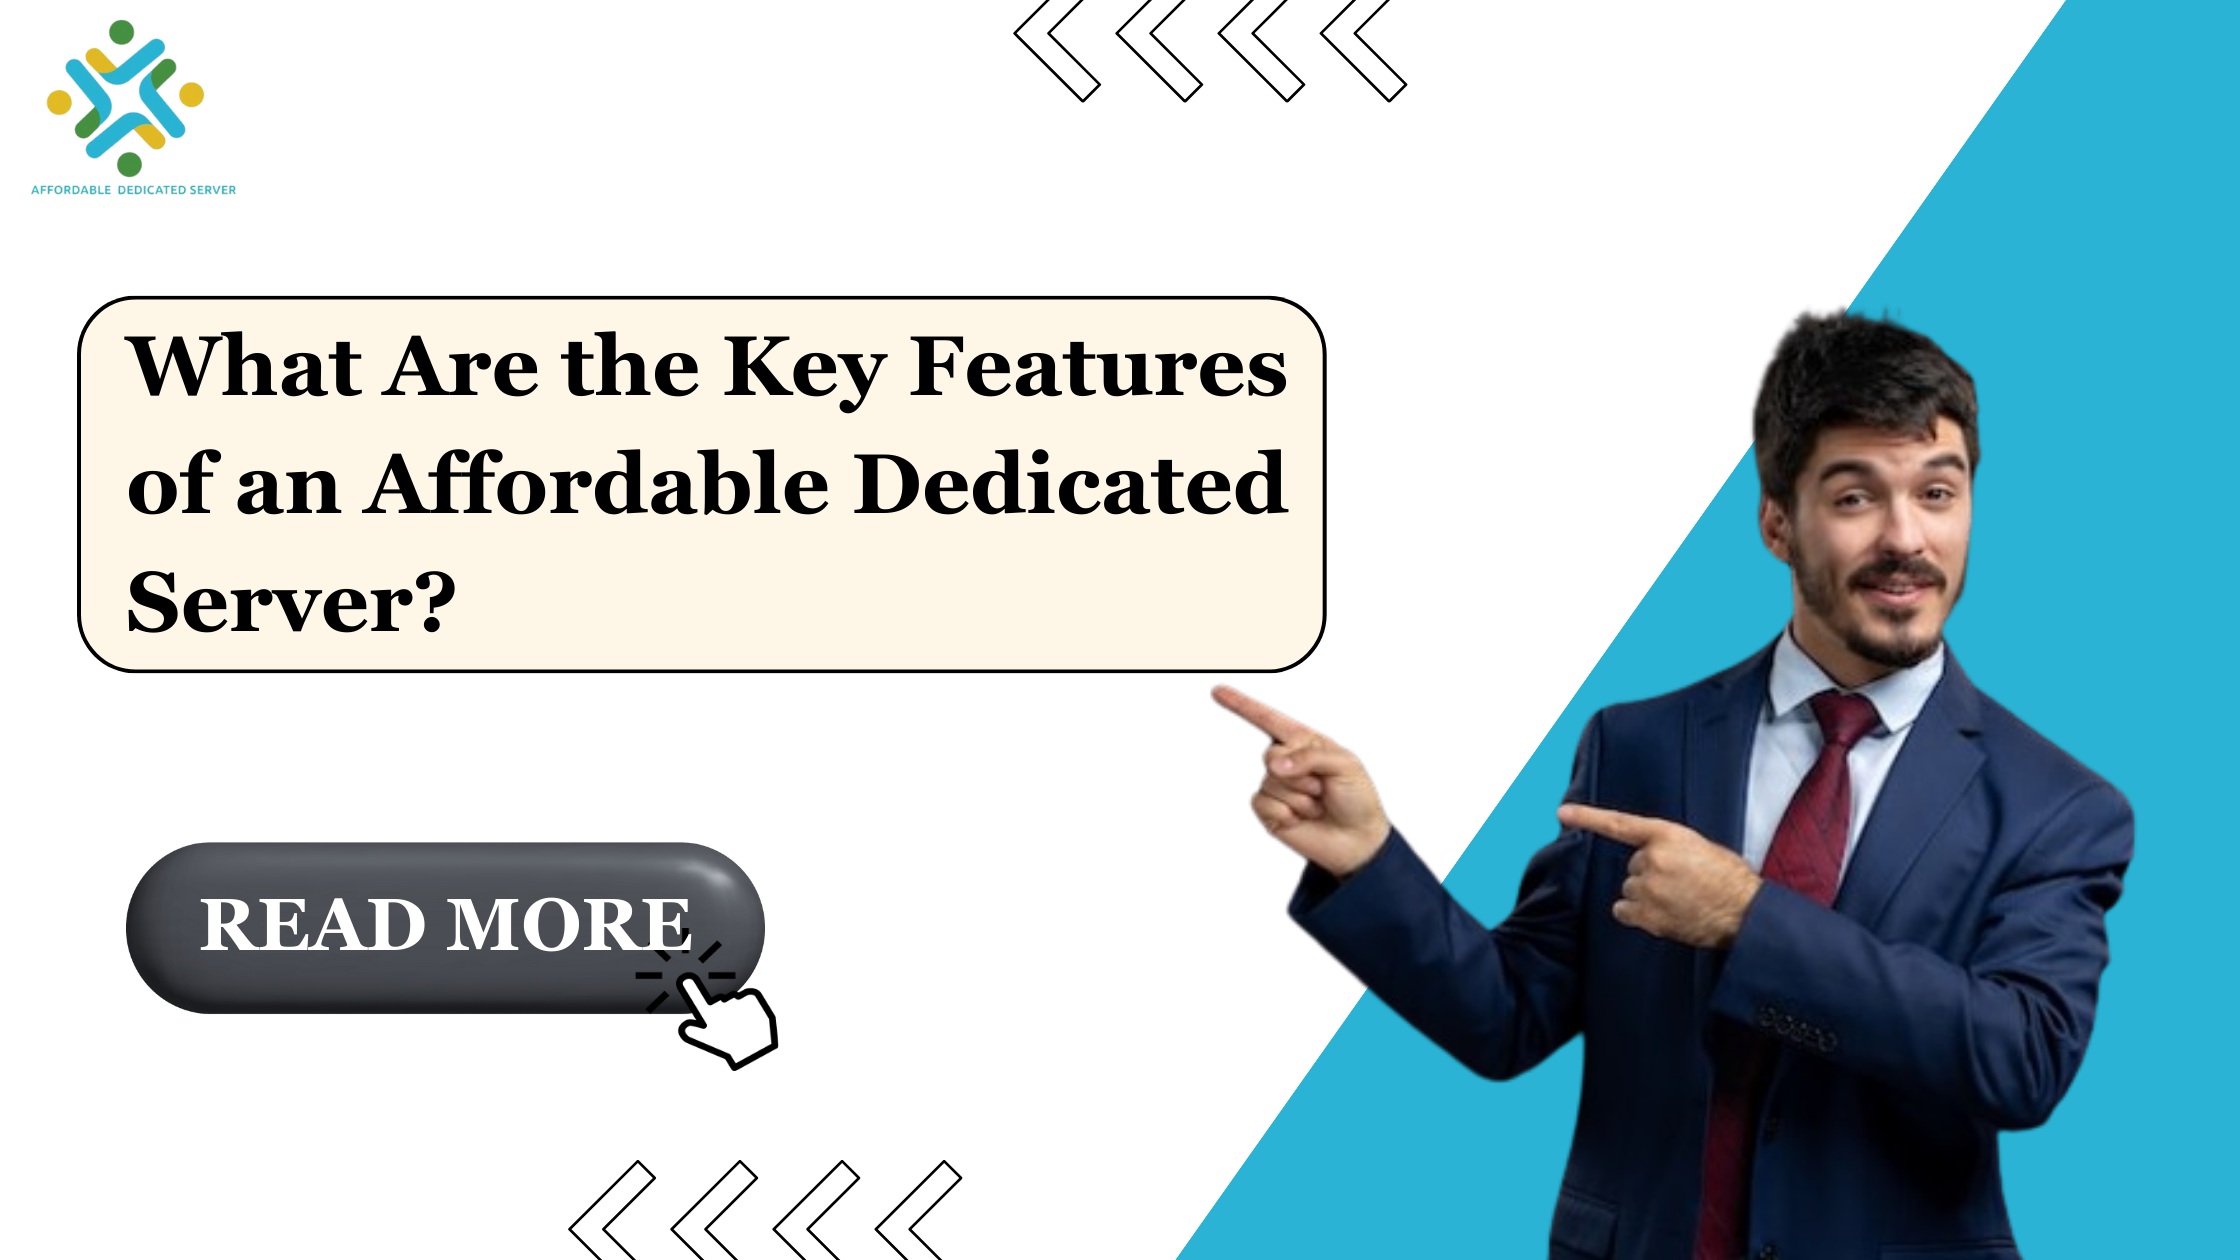 What Are the Key Features of an Affordable Dedicated Server